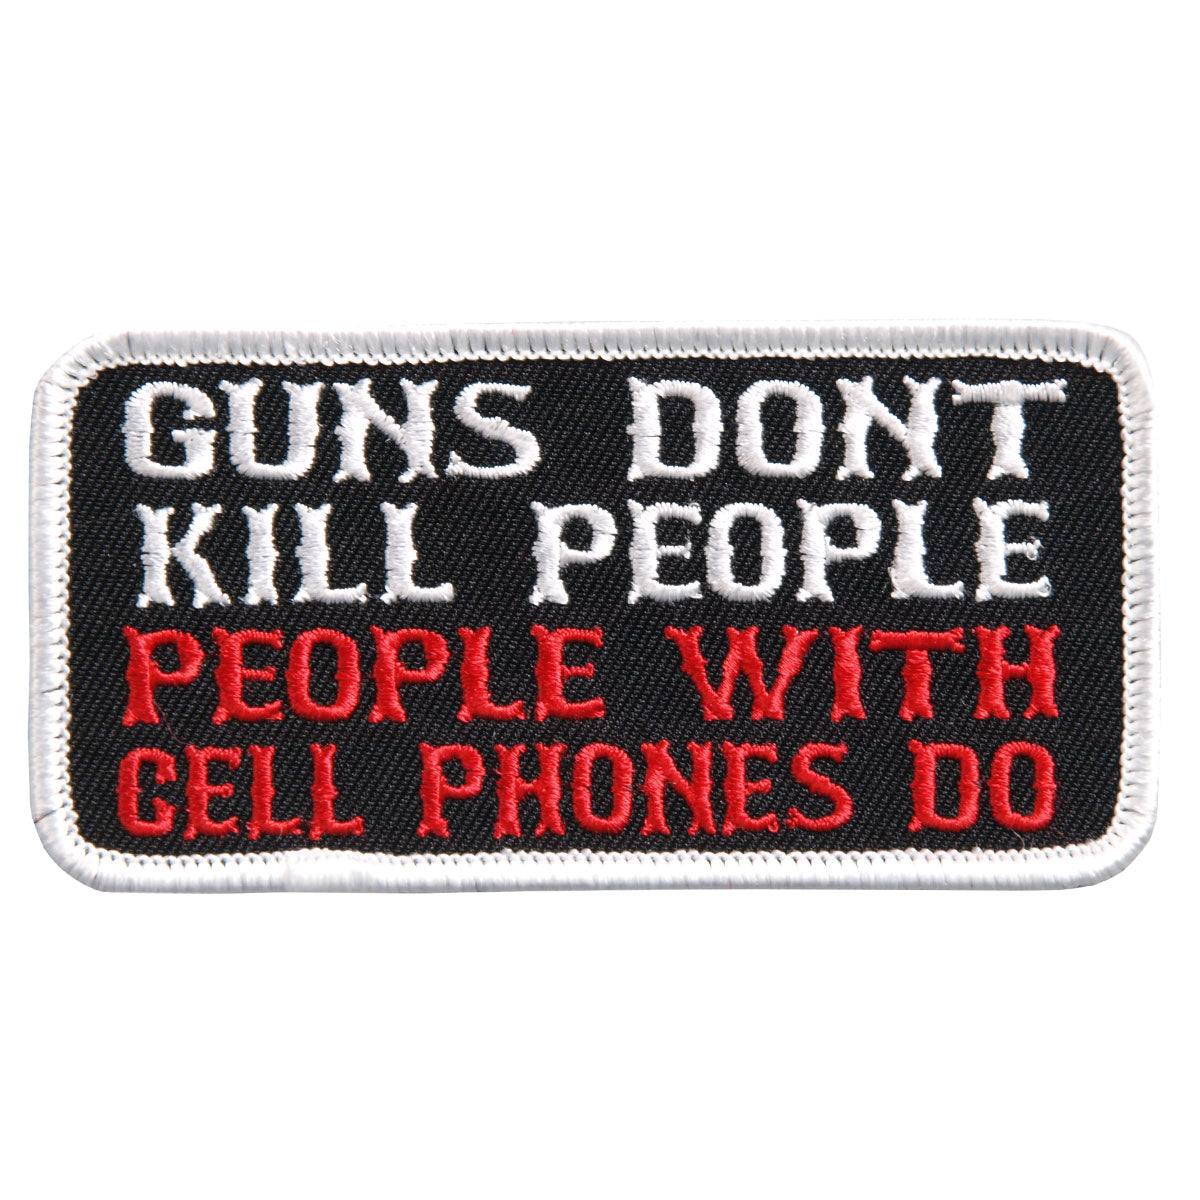 Hot Leathers PPL9389 Guns Don't Kill People Embroidered 4" x 2" Patch